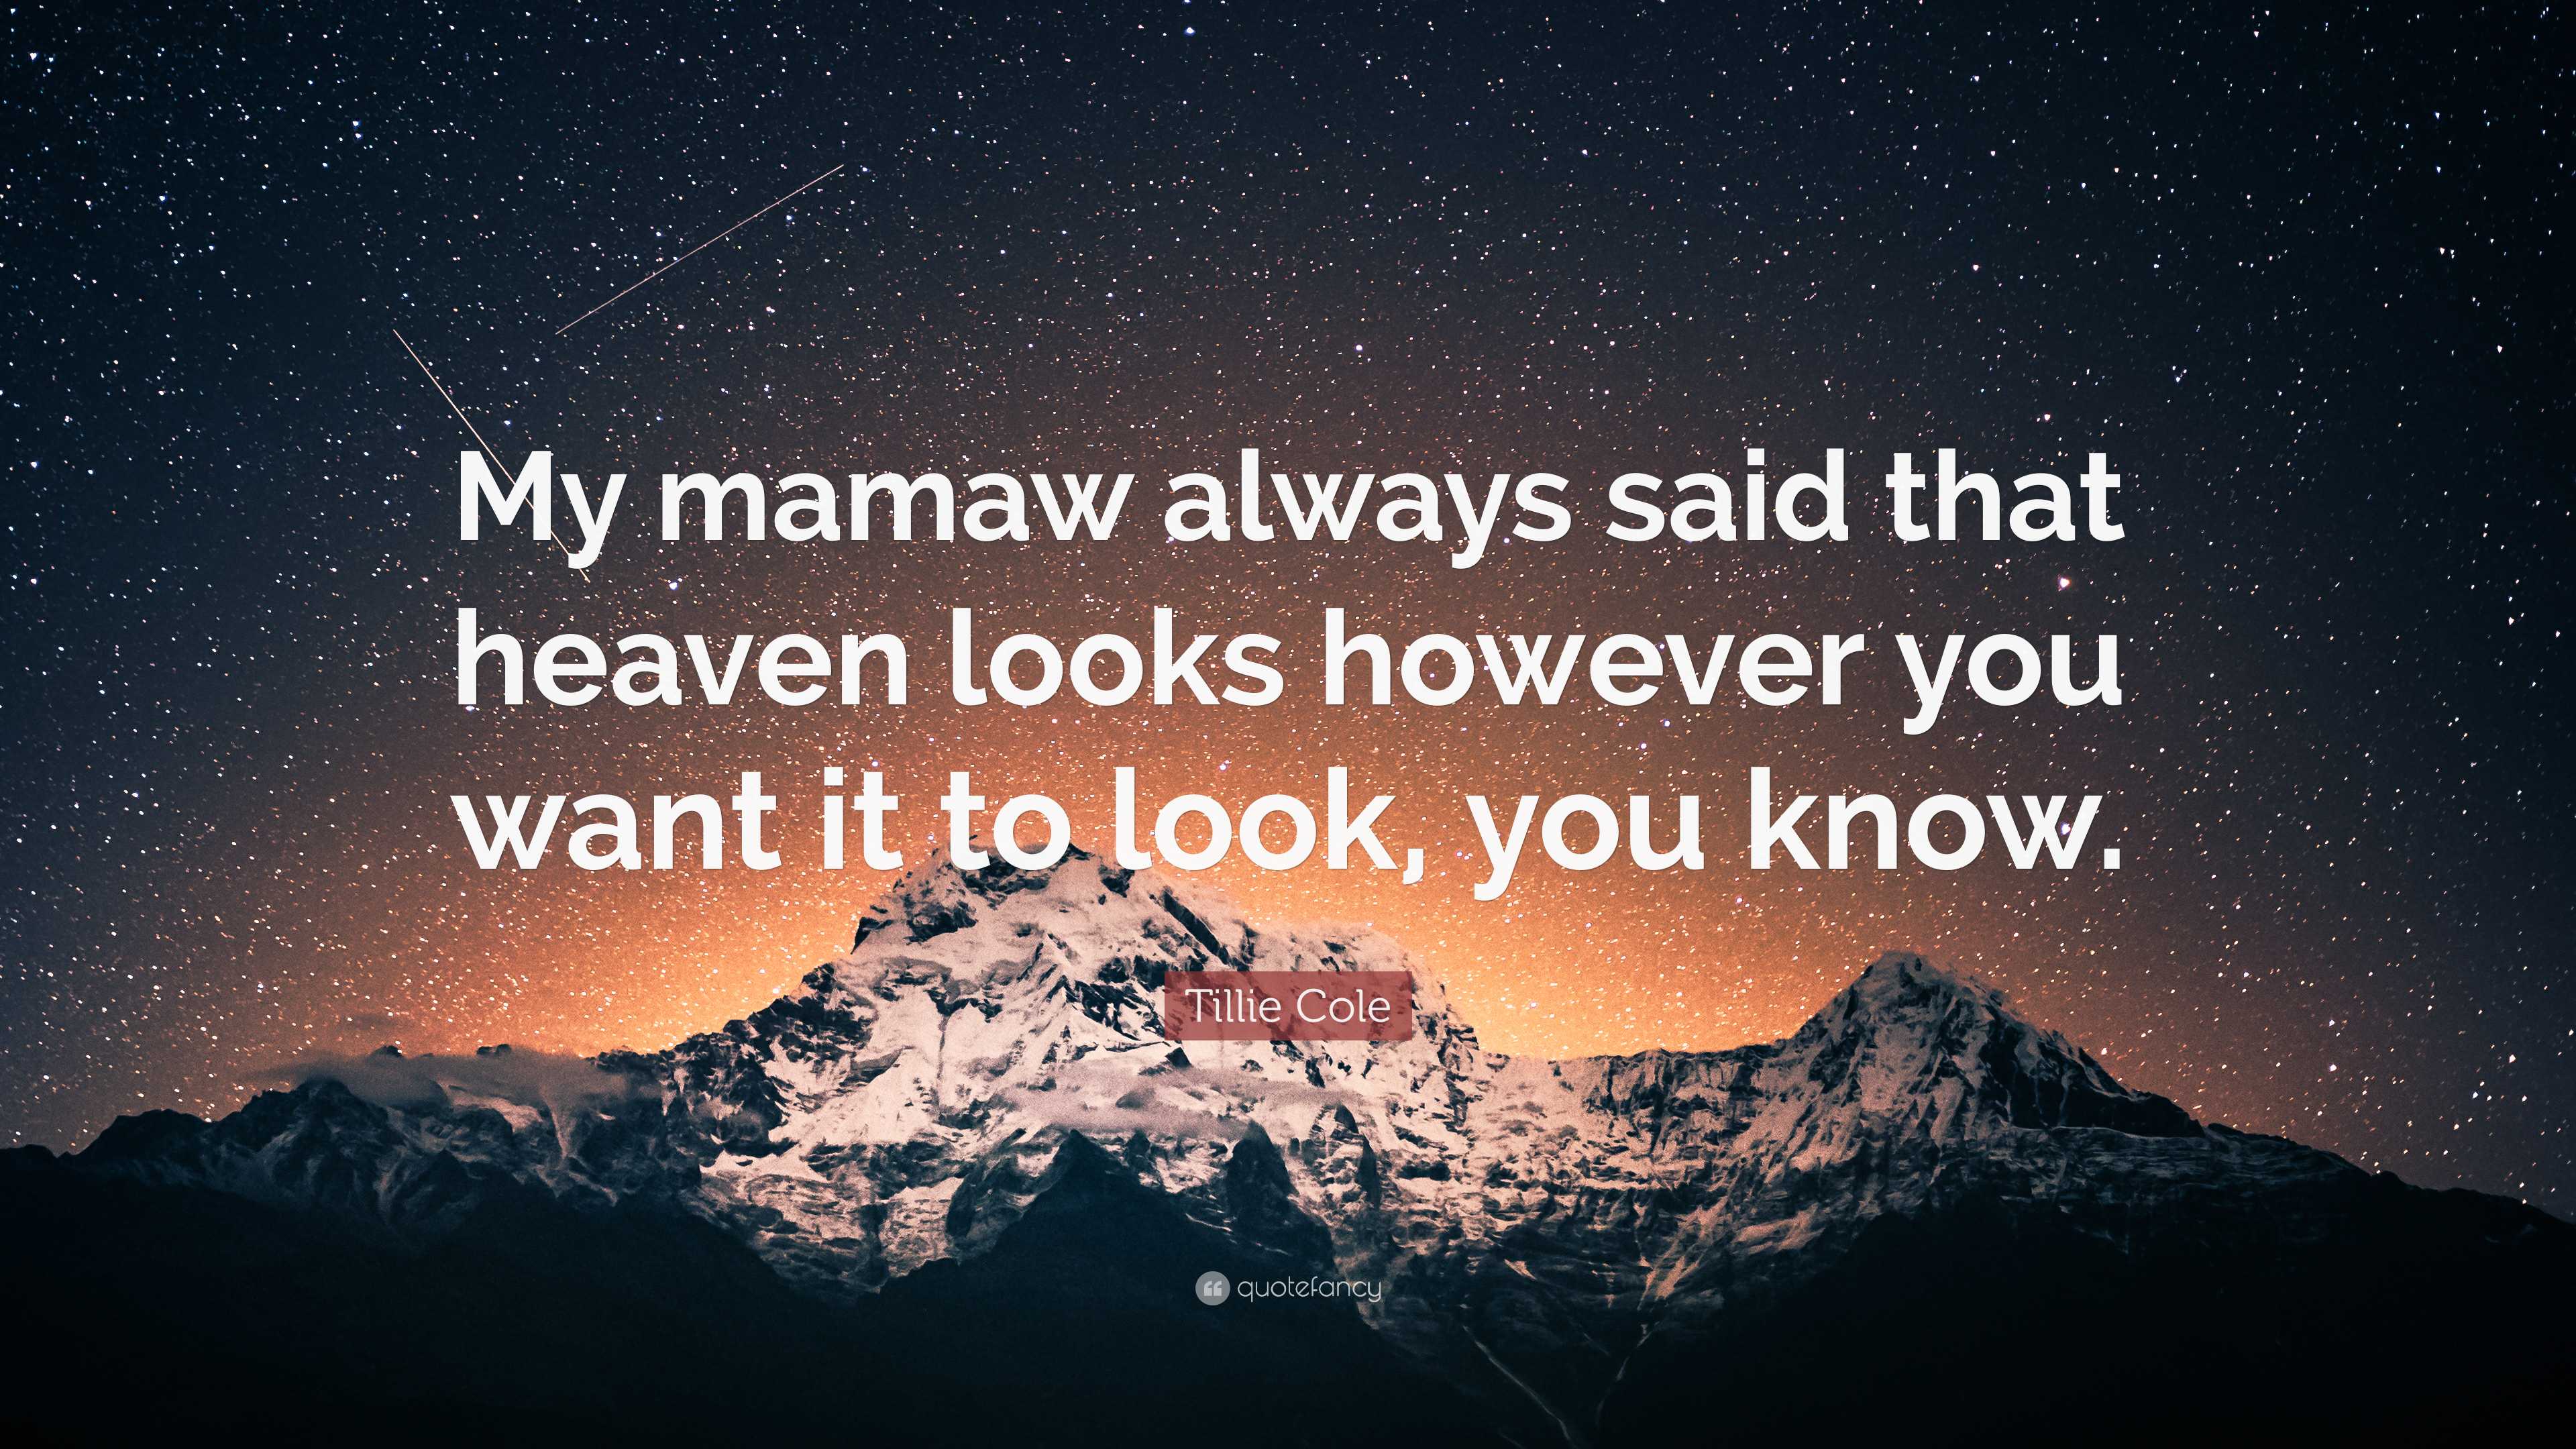 Tillie Cole Quote “my Mamaw Always Said That Heaven Looks However You Want It To Look You Know” 4993